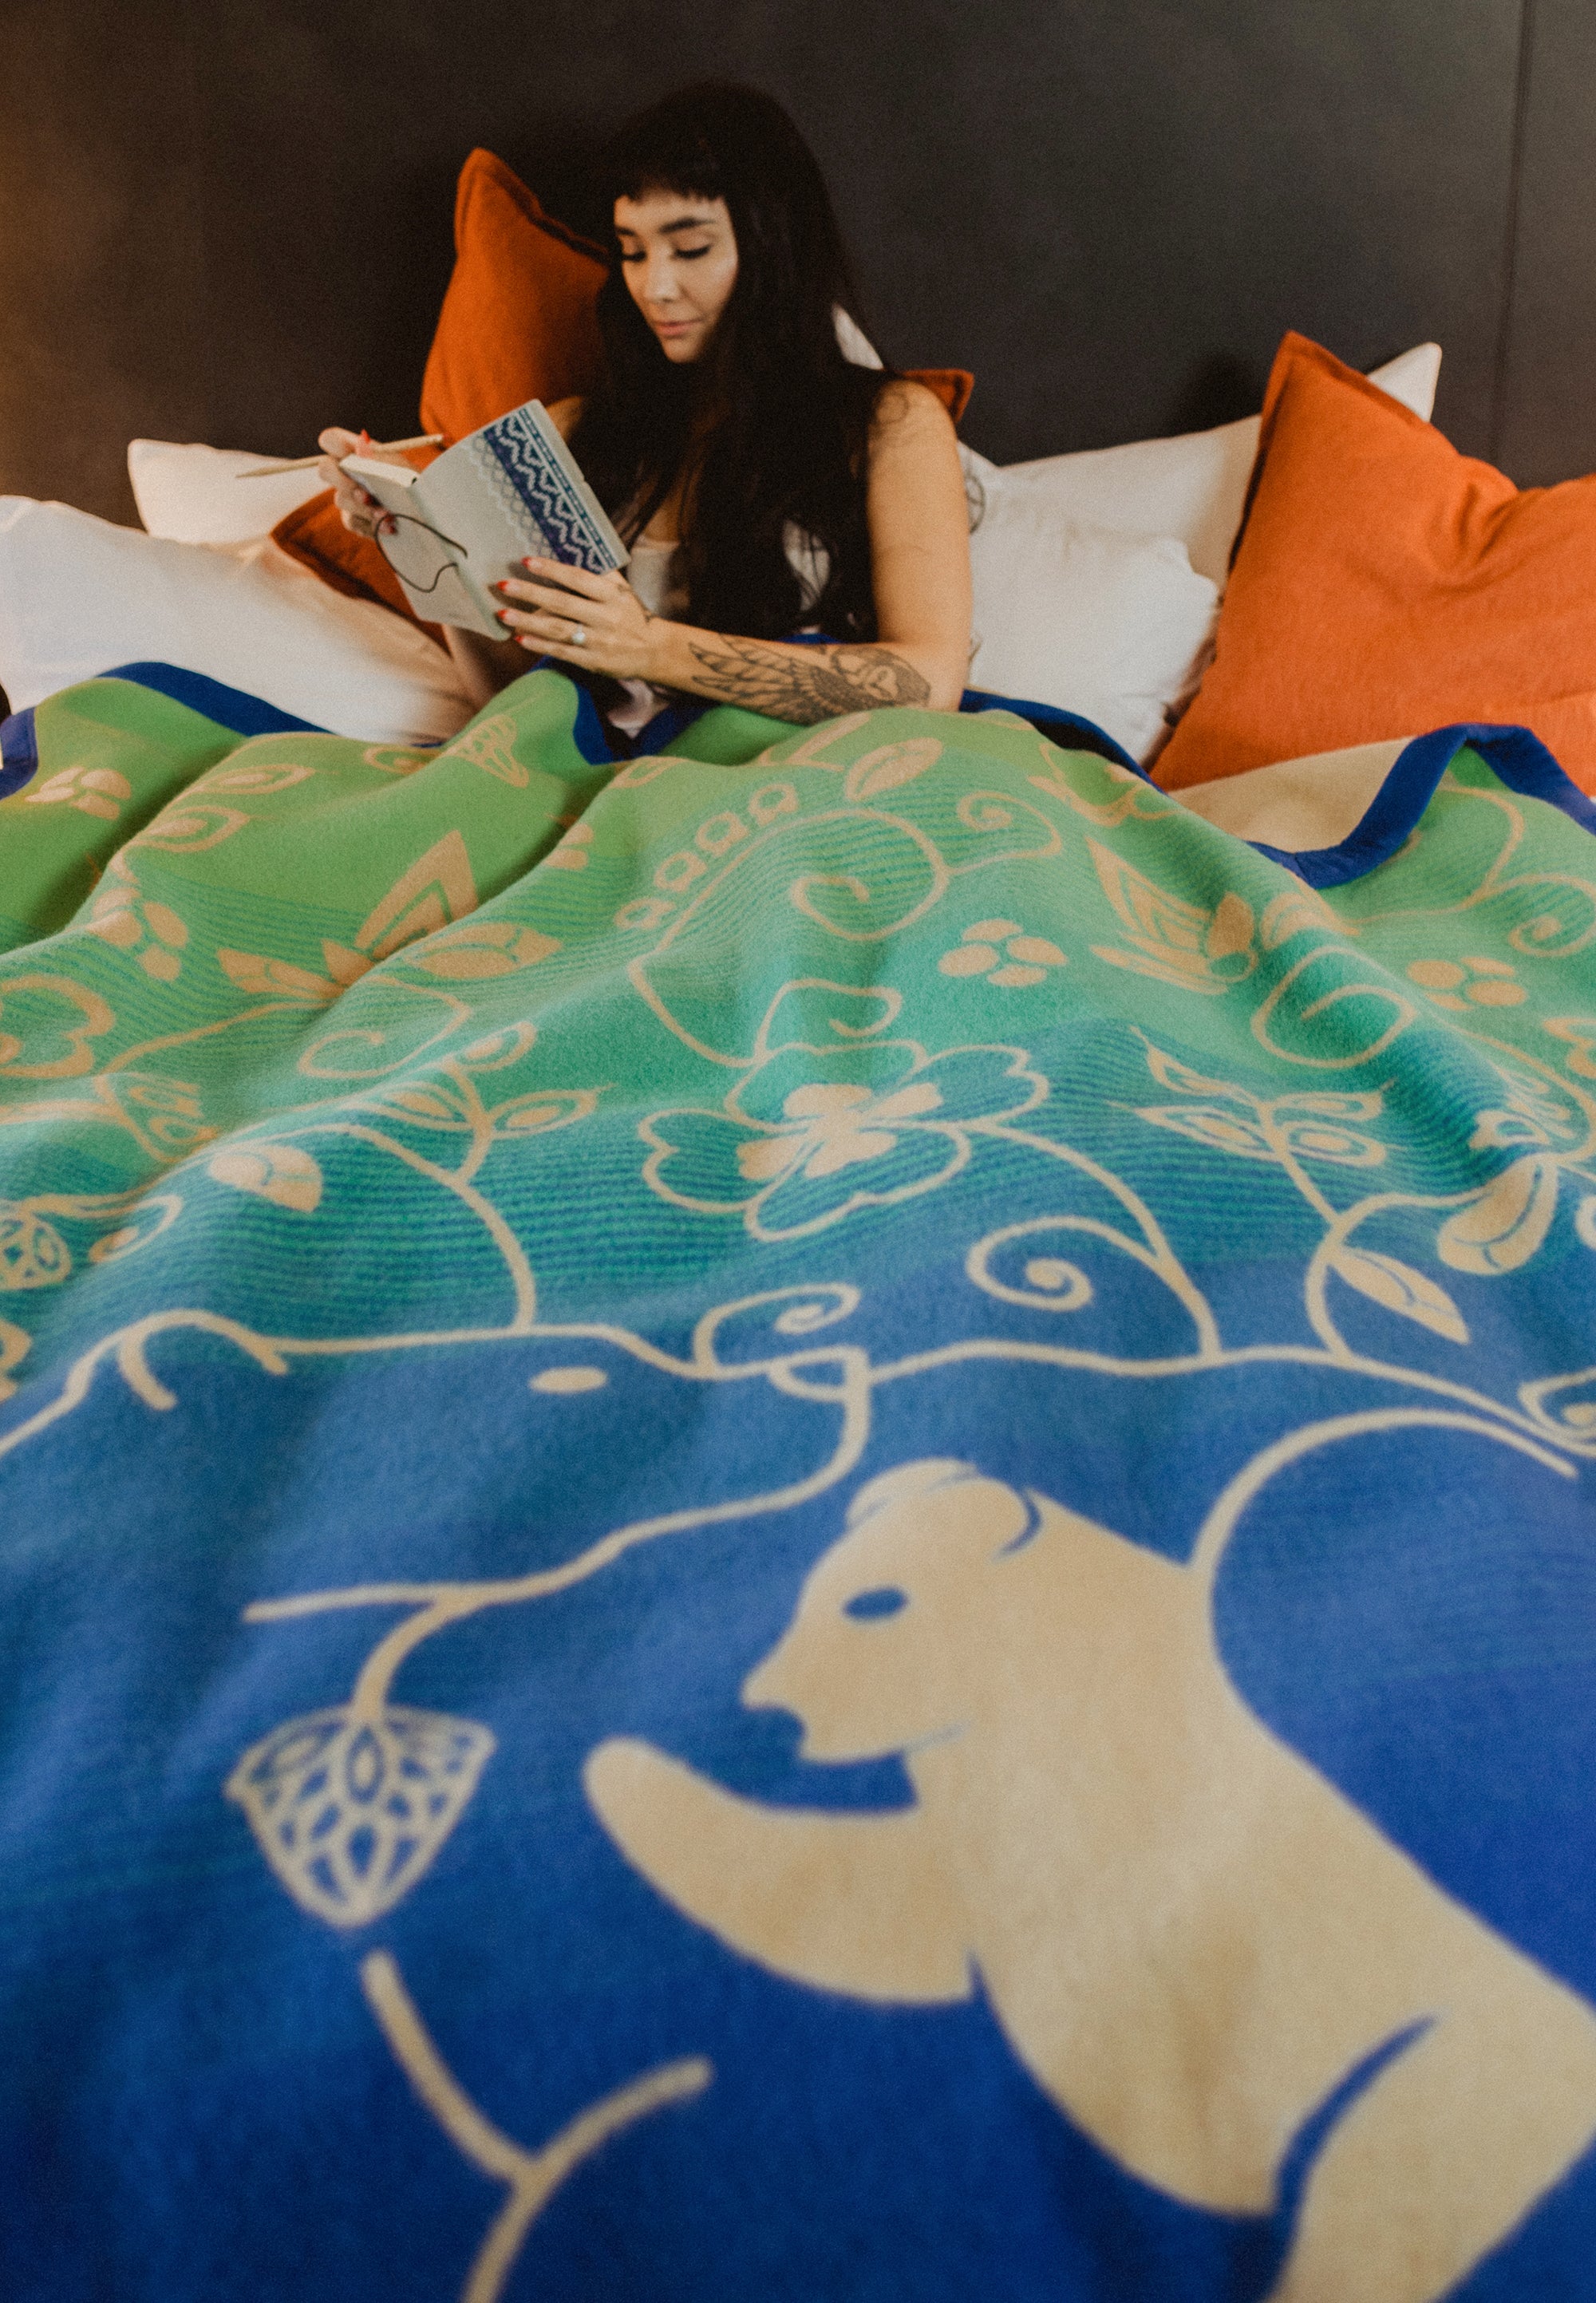 Woman-reads-in-bed-with-blue-tan-and-green-wool-blanket-covering-her.-Blanket-has-bear-and-cub-design-surrounded-by-woodlands-floral